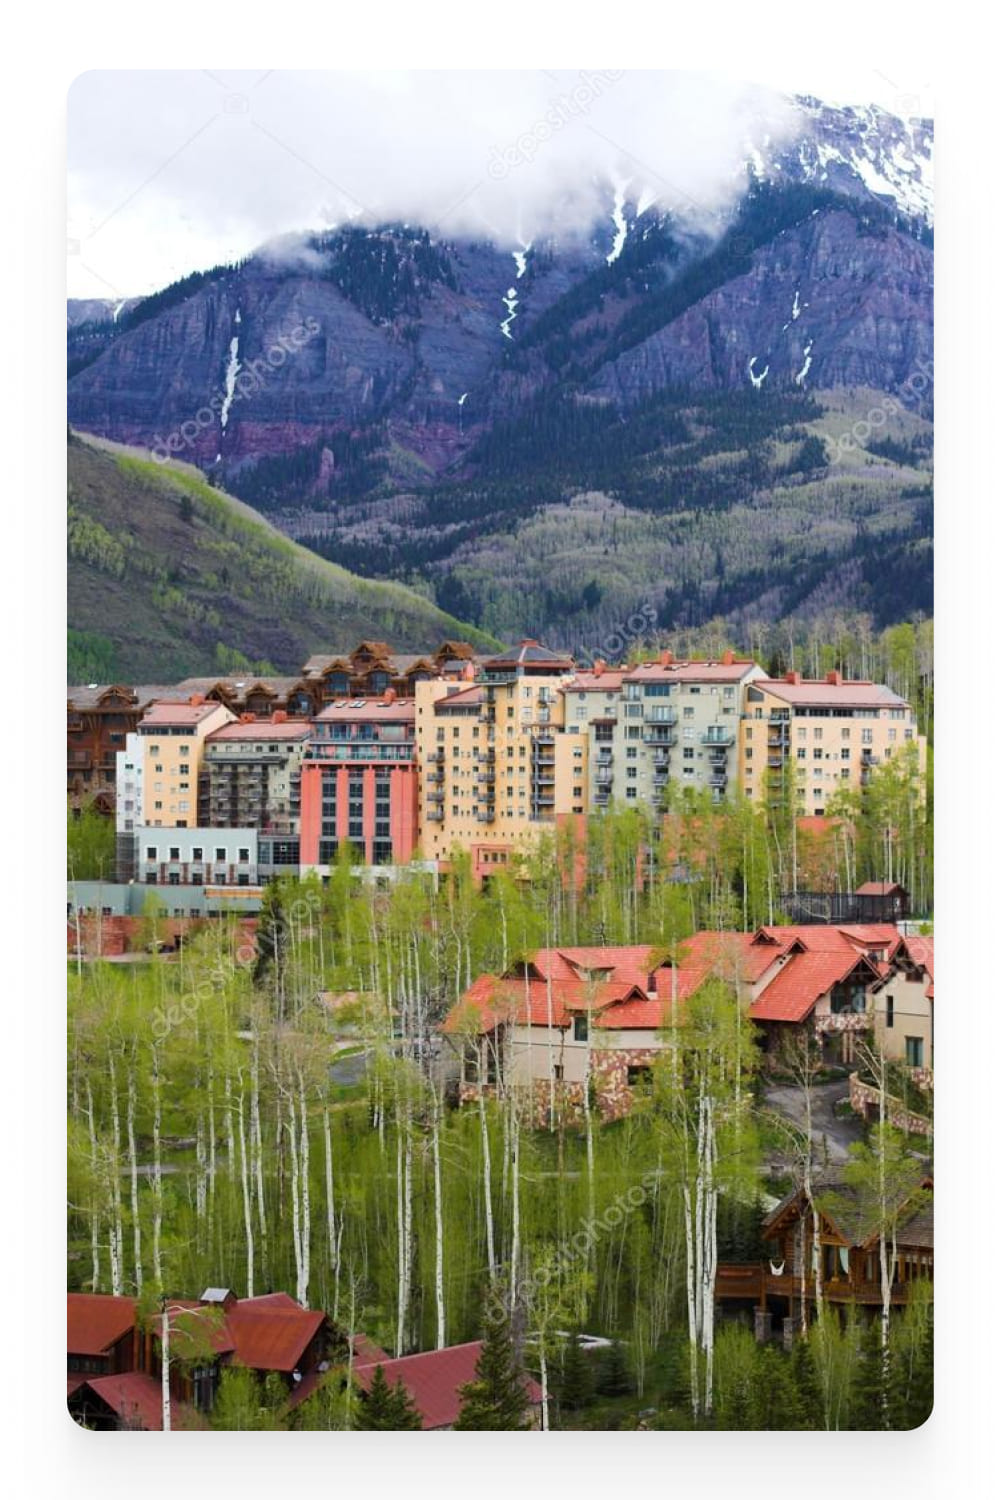 Photo of multi-storey buildings against the backdrop of mountains.